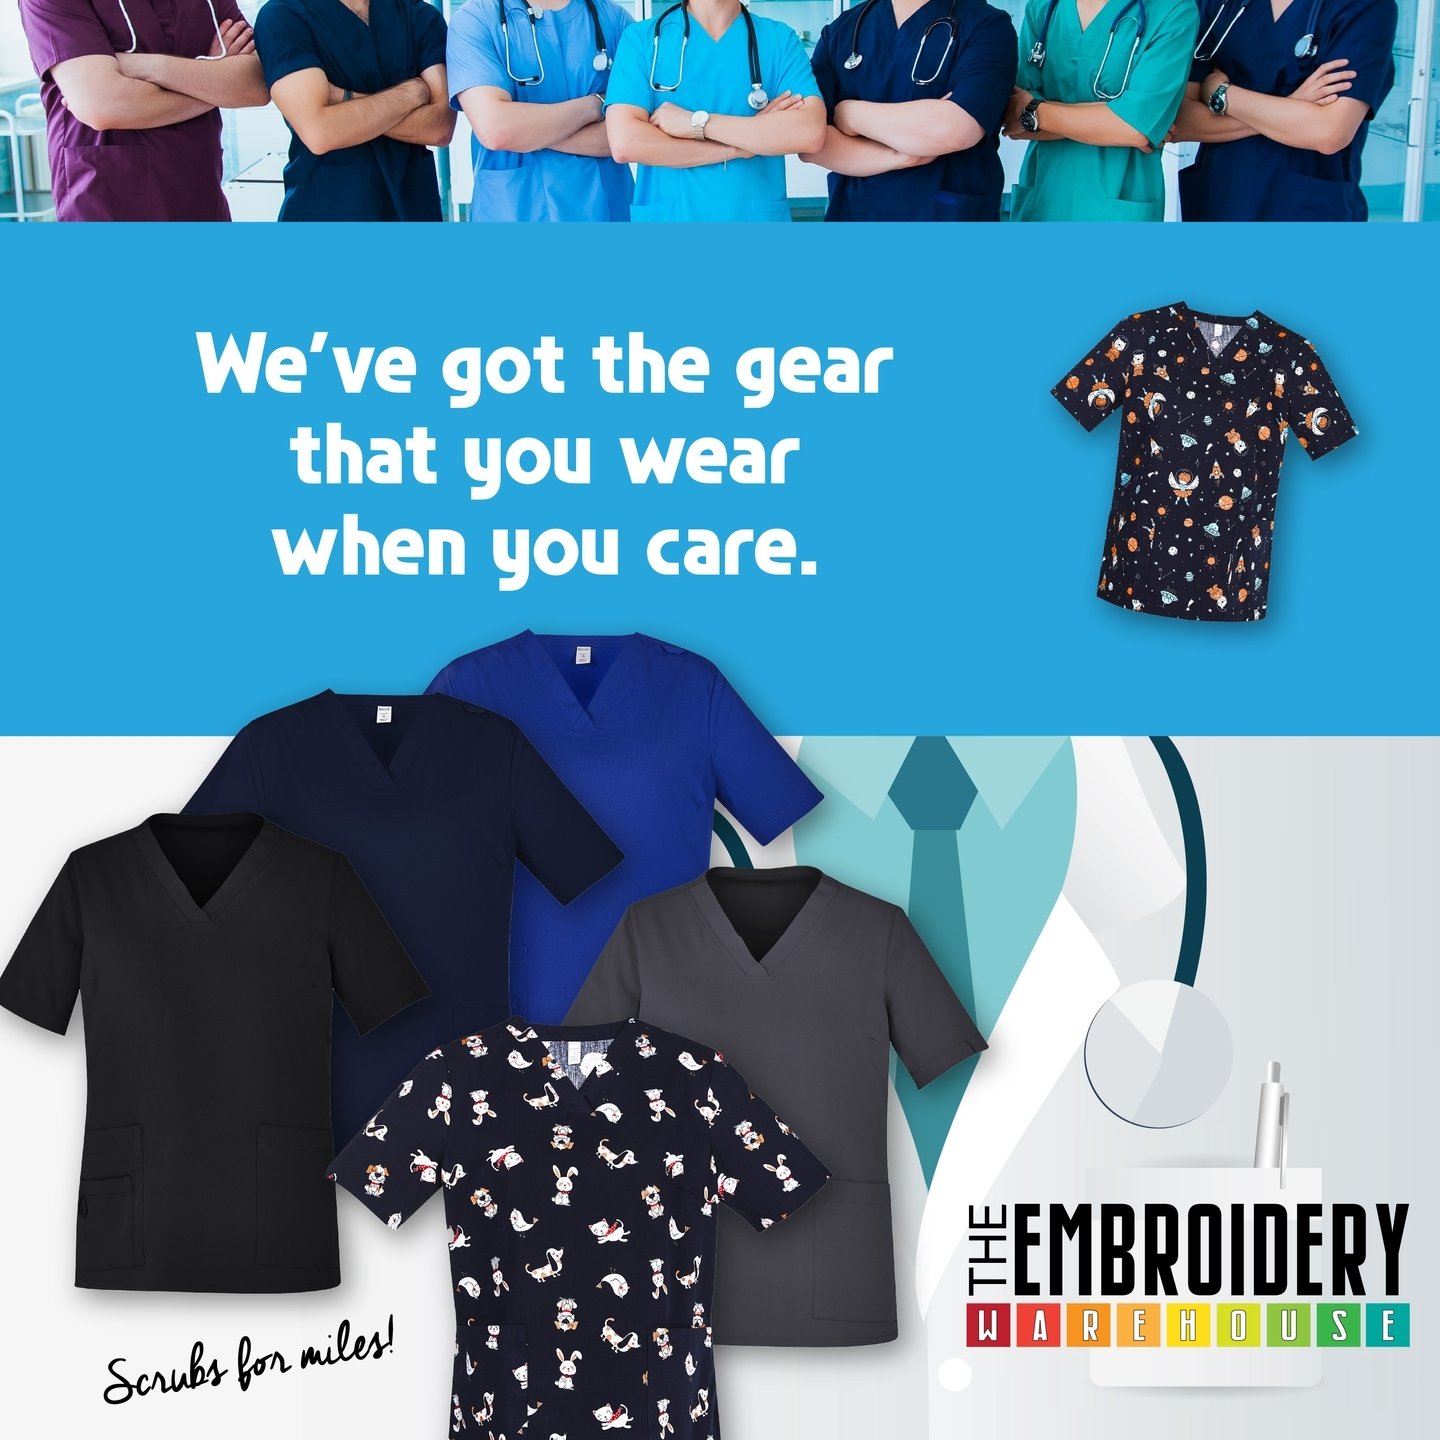 Attention healthcare providers! 🩺 Looking for scrubs that work as hard as you do? Look no further! Our healthcare uniforms are designed for durability, comfort, and style. Let's dress your team in gear that's as reliable as your care. Order now and 